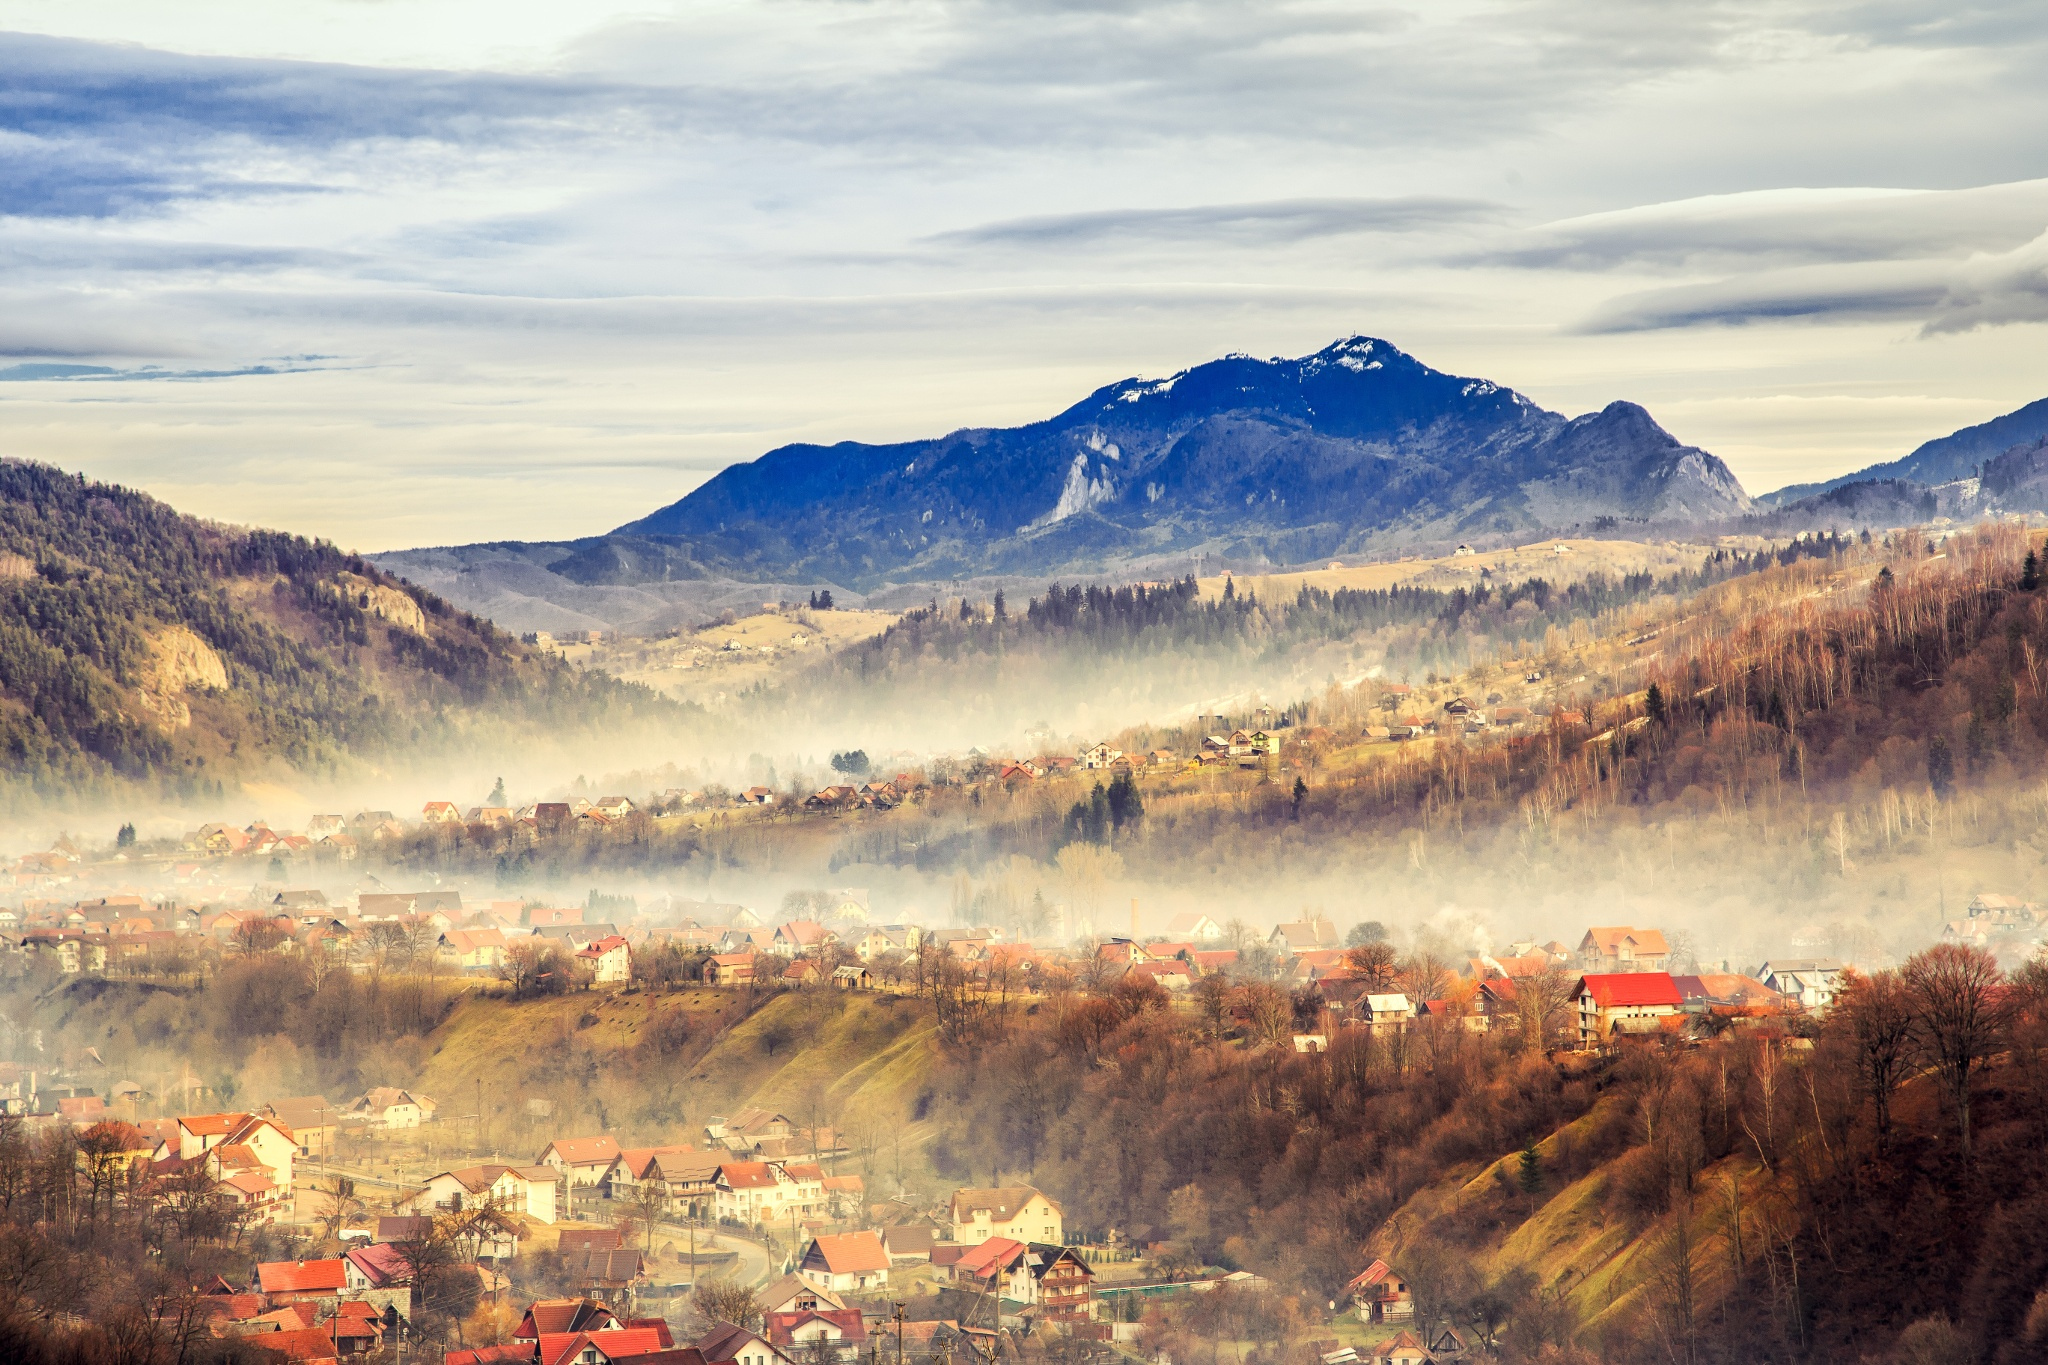 Village in the mountains by Cosmin Anghel